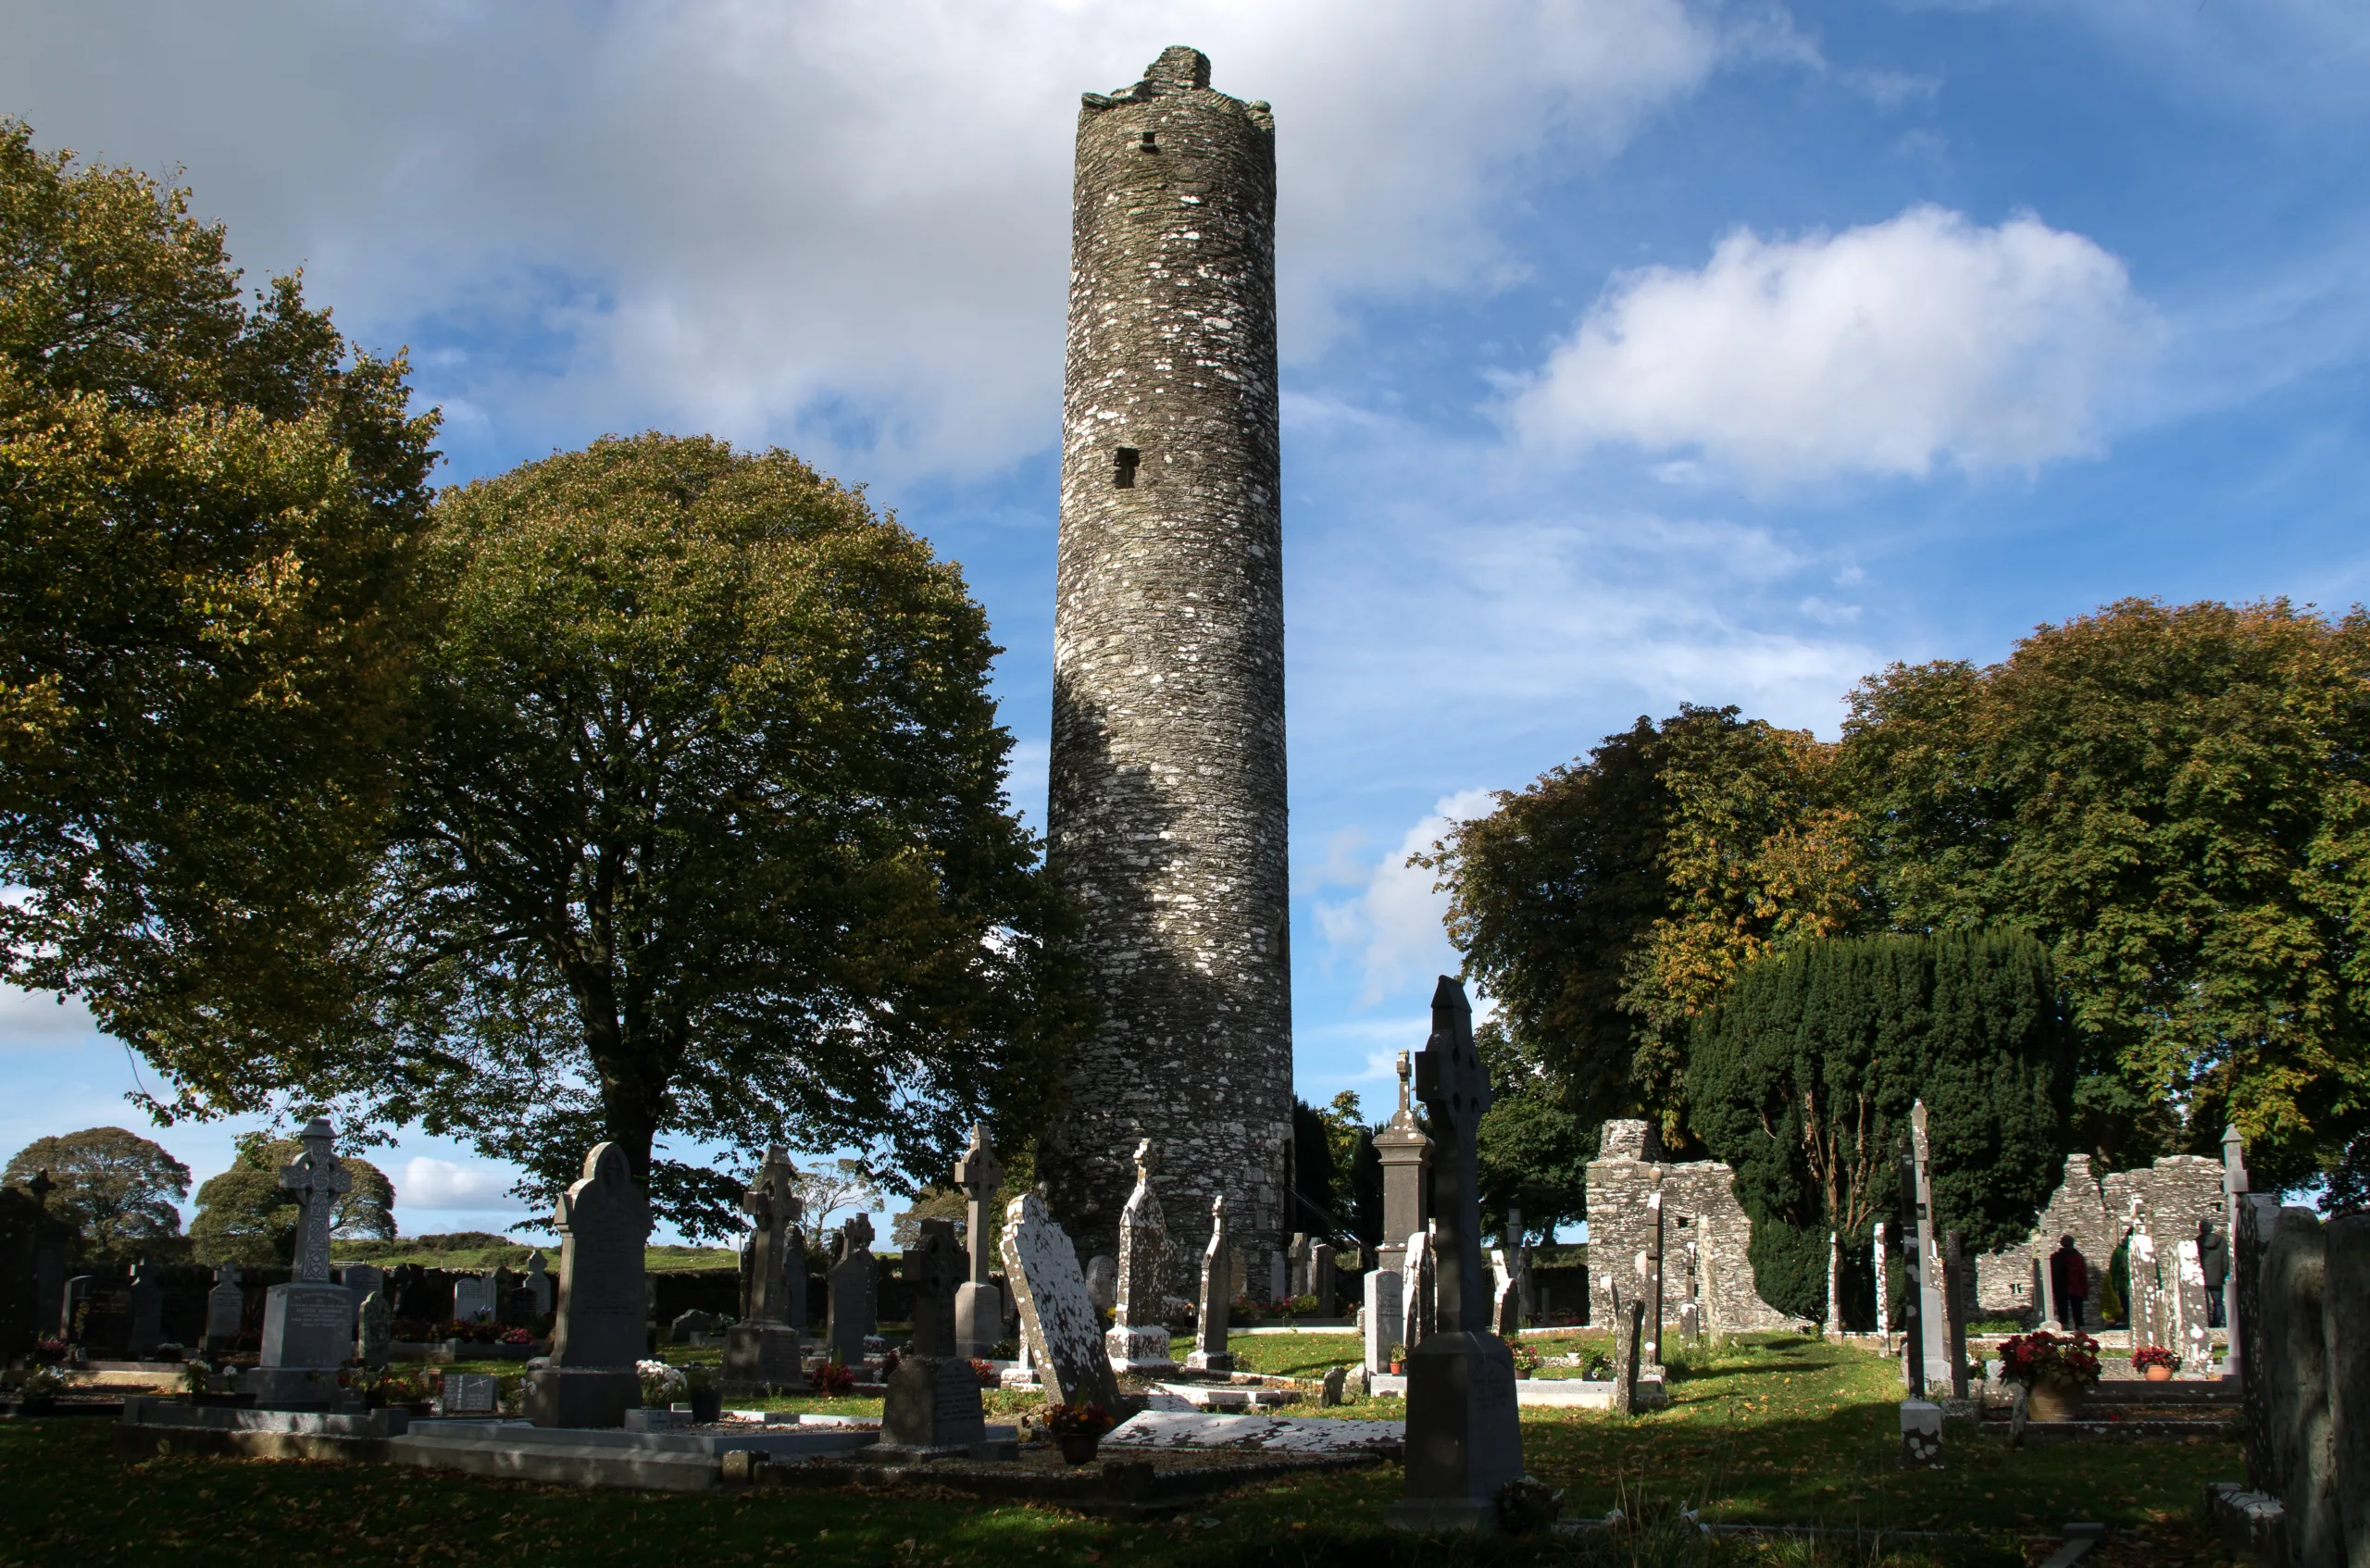 The round tower at Monasterboice